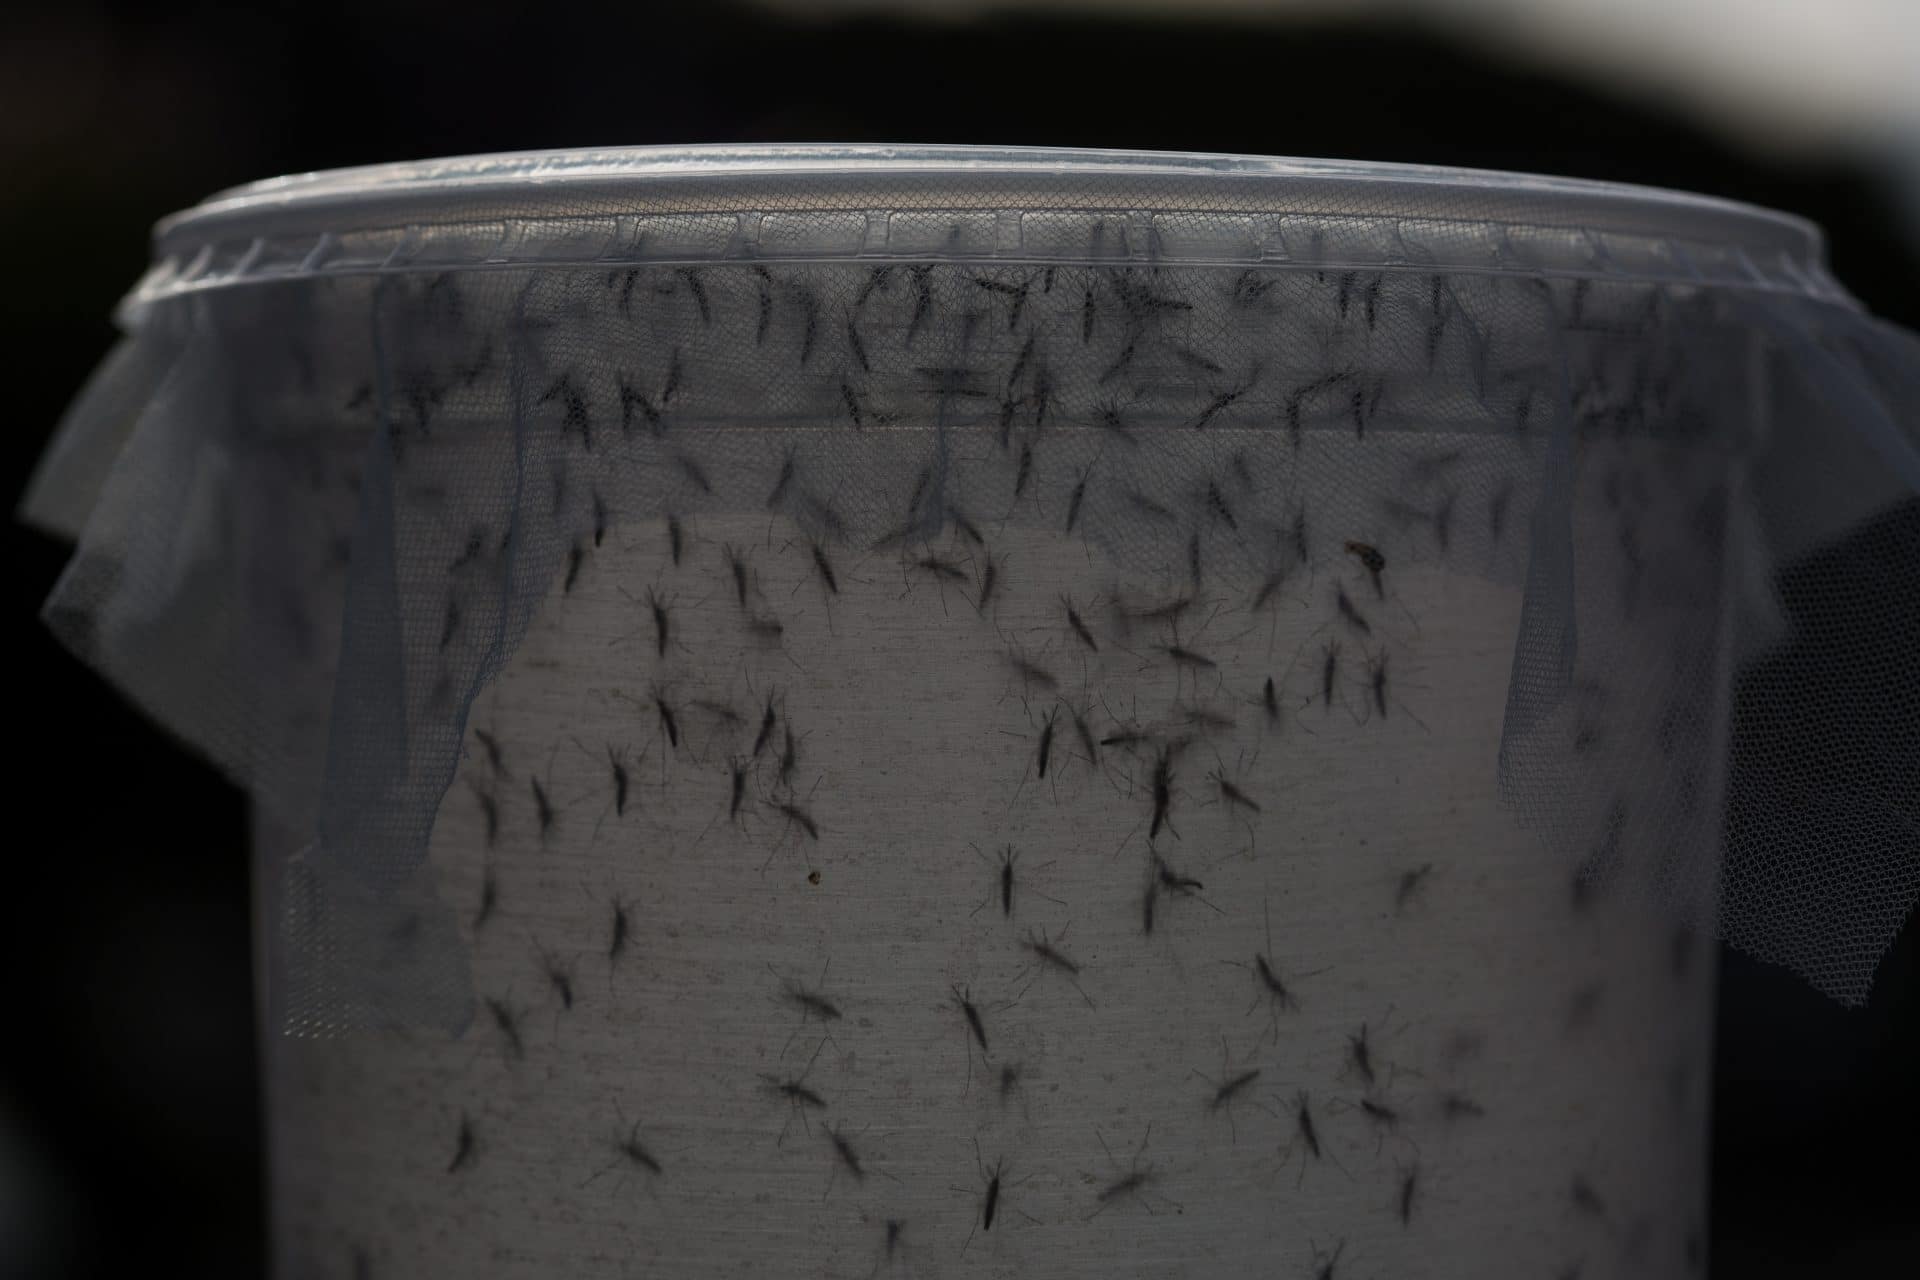 Paradise altered: EPA approves first release of genetically modified mosquitoes in Florida Keys